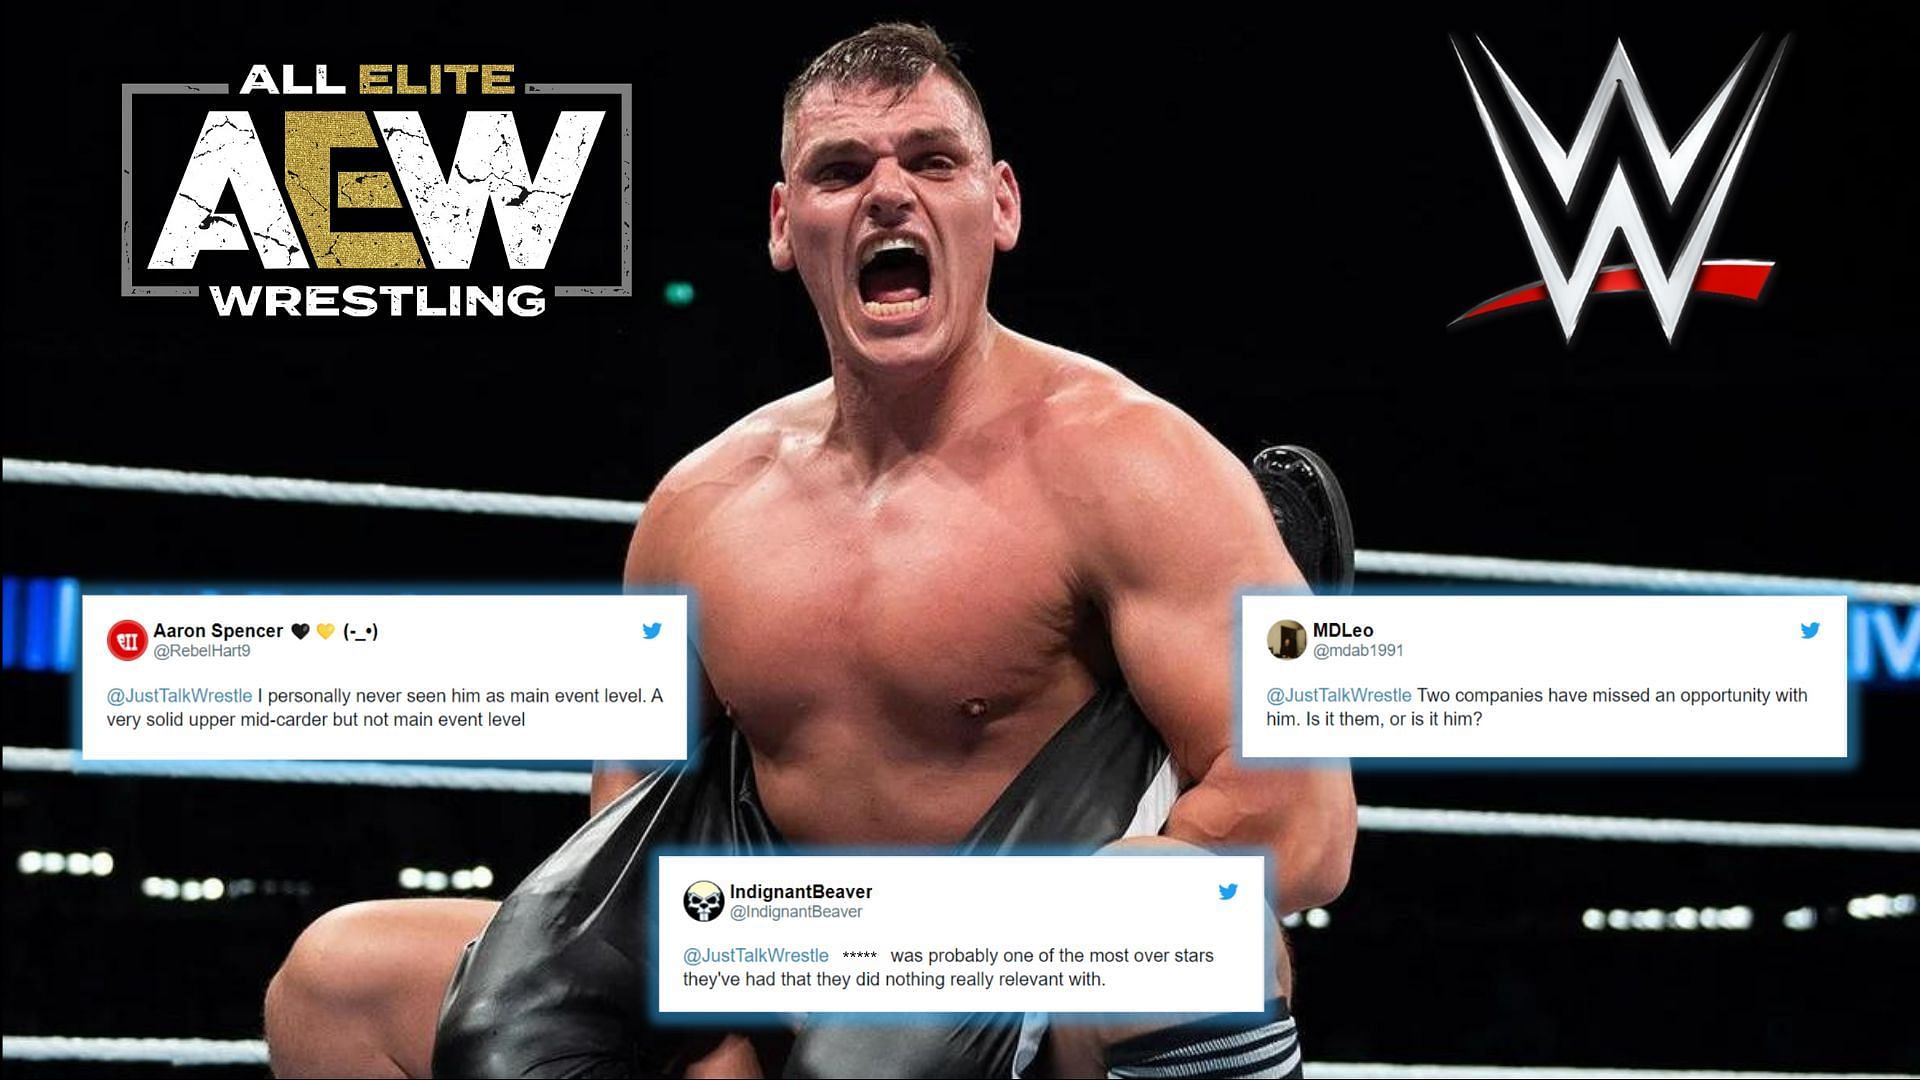 Will an AEW star join WWE in the future to have a Gunther-like run?